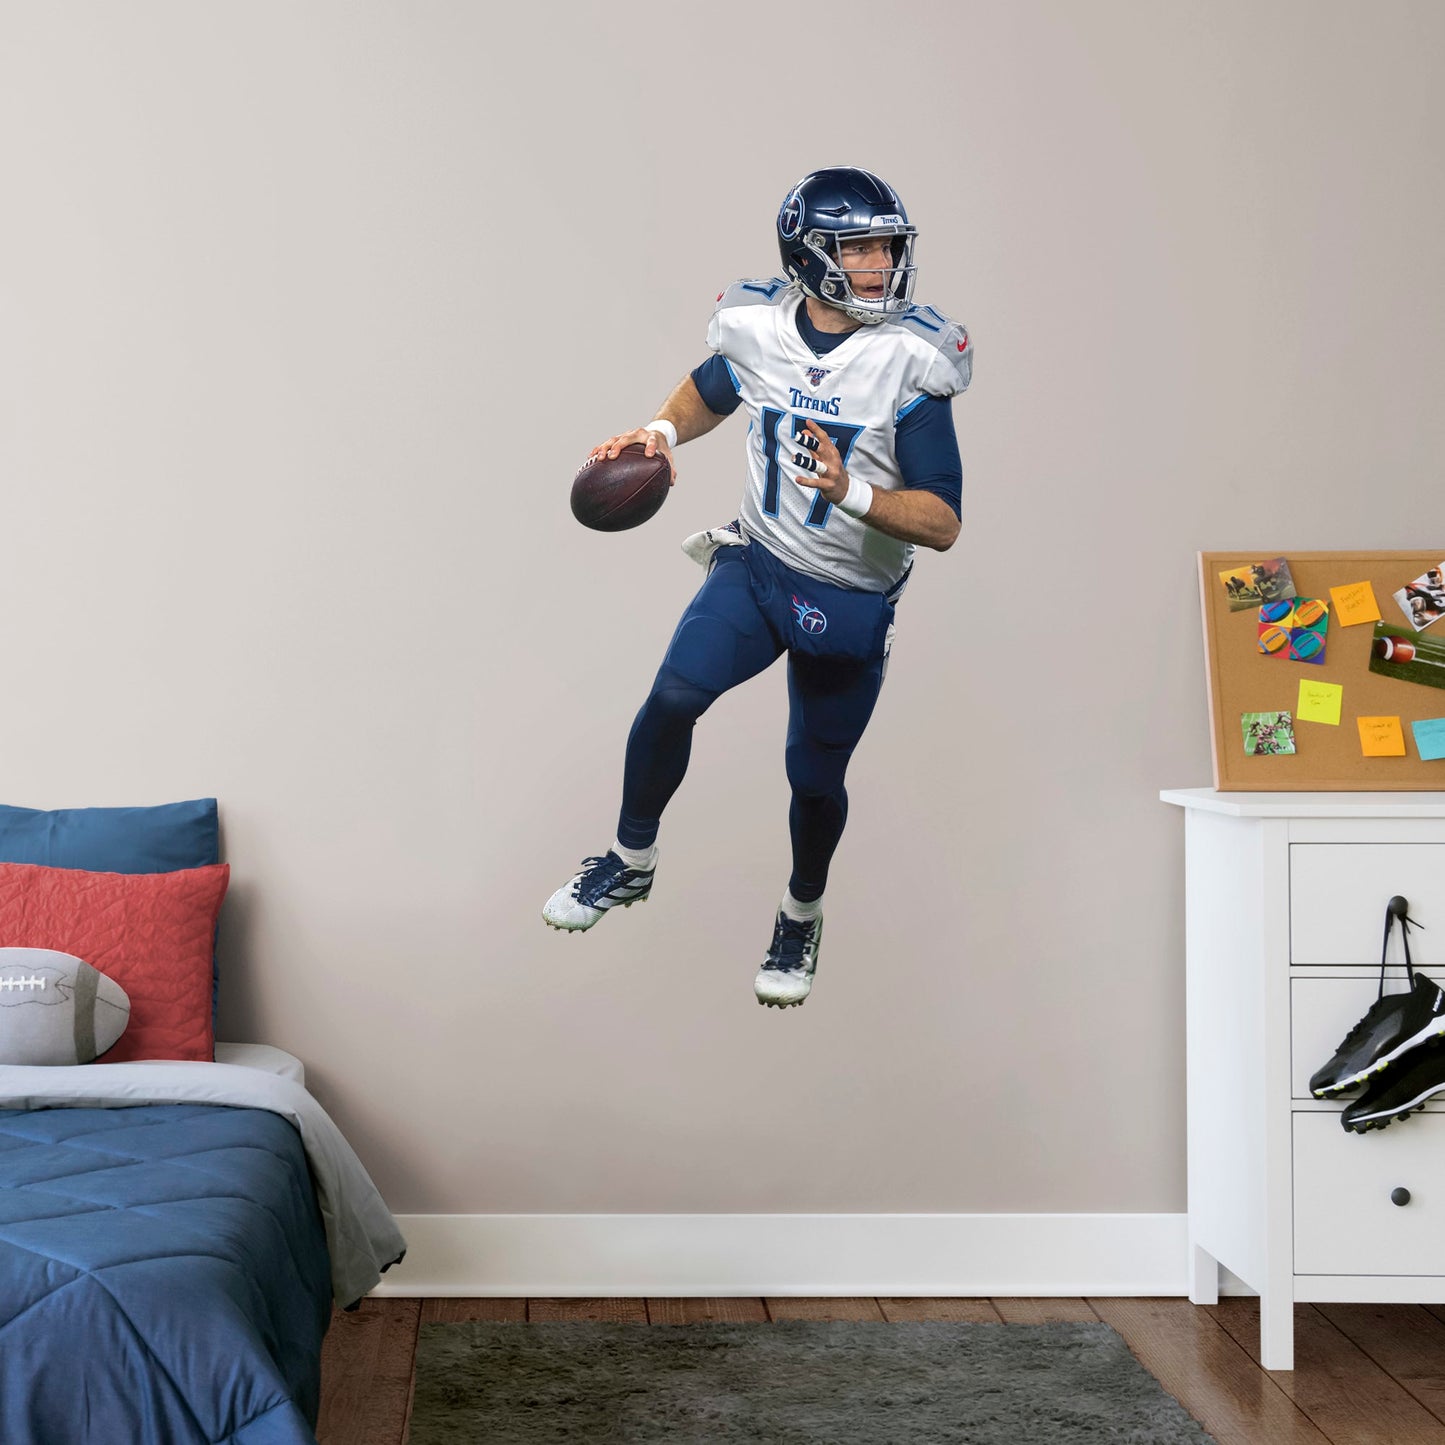 Giant Athlete + 2 Decals (26"W x 51"H) Show off your support for the NFL 2019 Comeback Player of the Year, Ryan Tannehill, with this officially licensed wall decal of the Tennessee Titan quarterback. Considered one of the best quarterbacks in the NFL, Tannessee is geared up to complete the pass and dominate the AFC South in any bedroom, sports bar, or fan cave with this high-quality wall decal in the iconic Titans navy blue and silver uniform. Nashville isn't just for music, let’s go Titans!